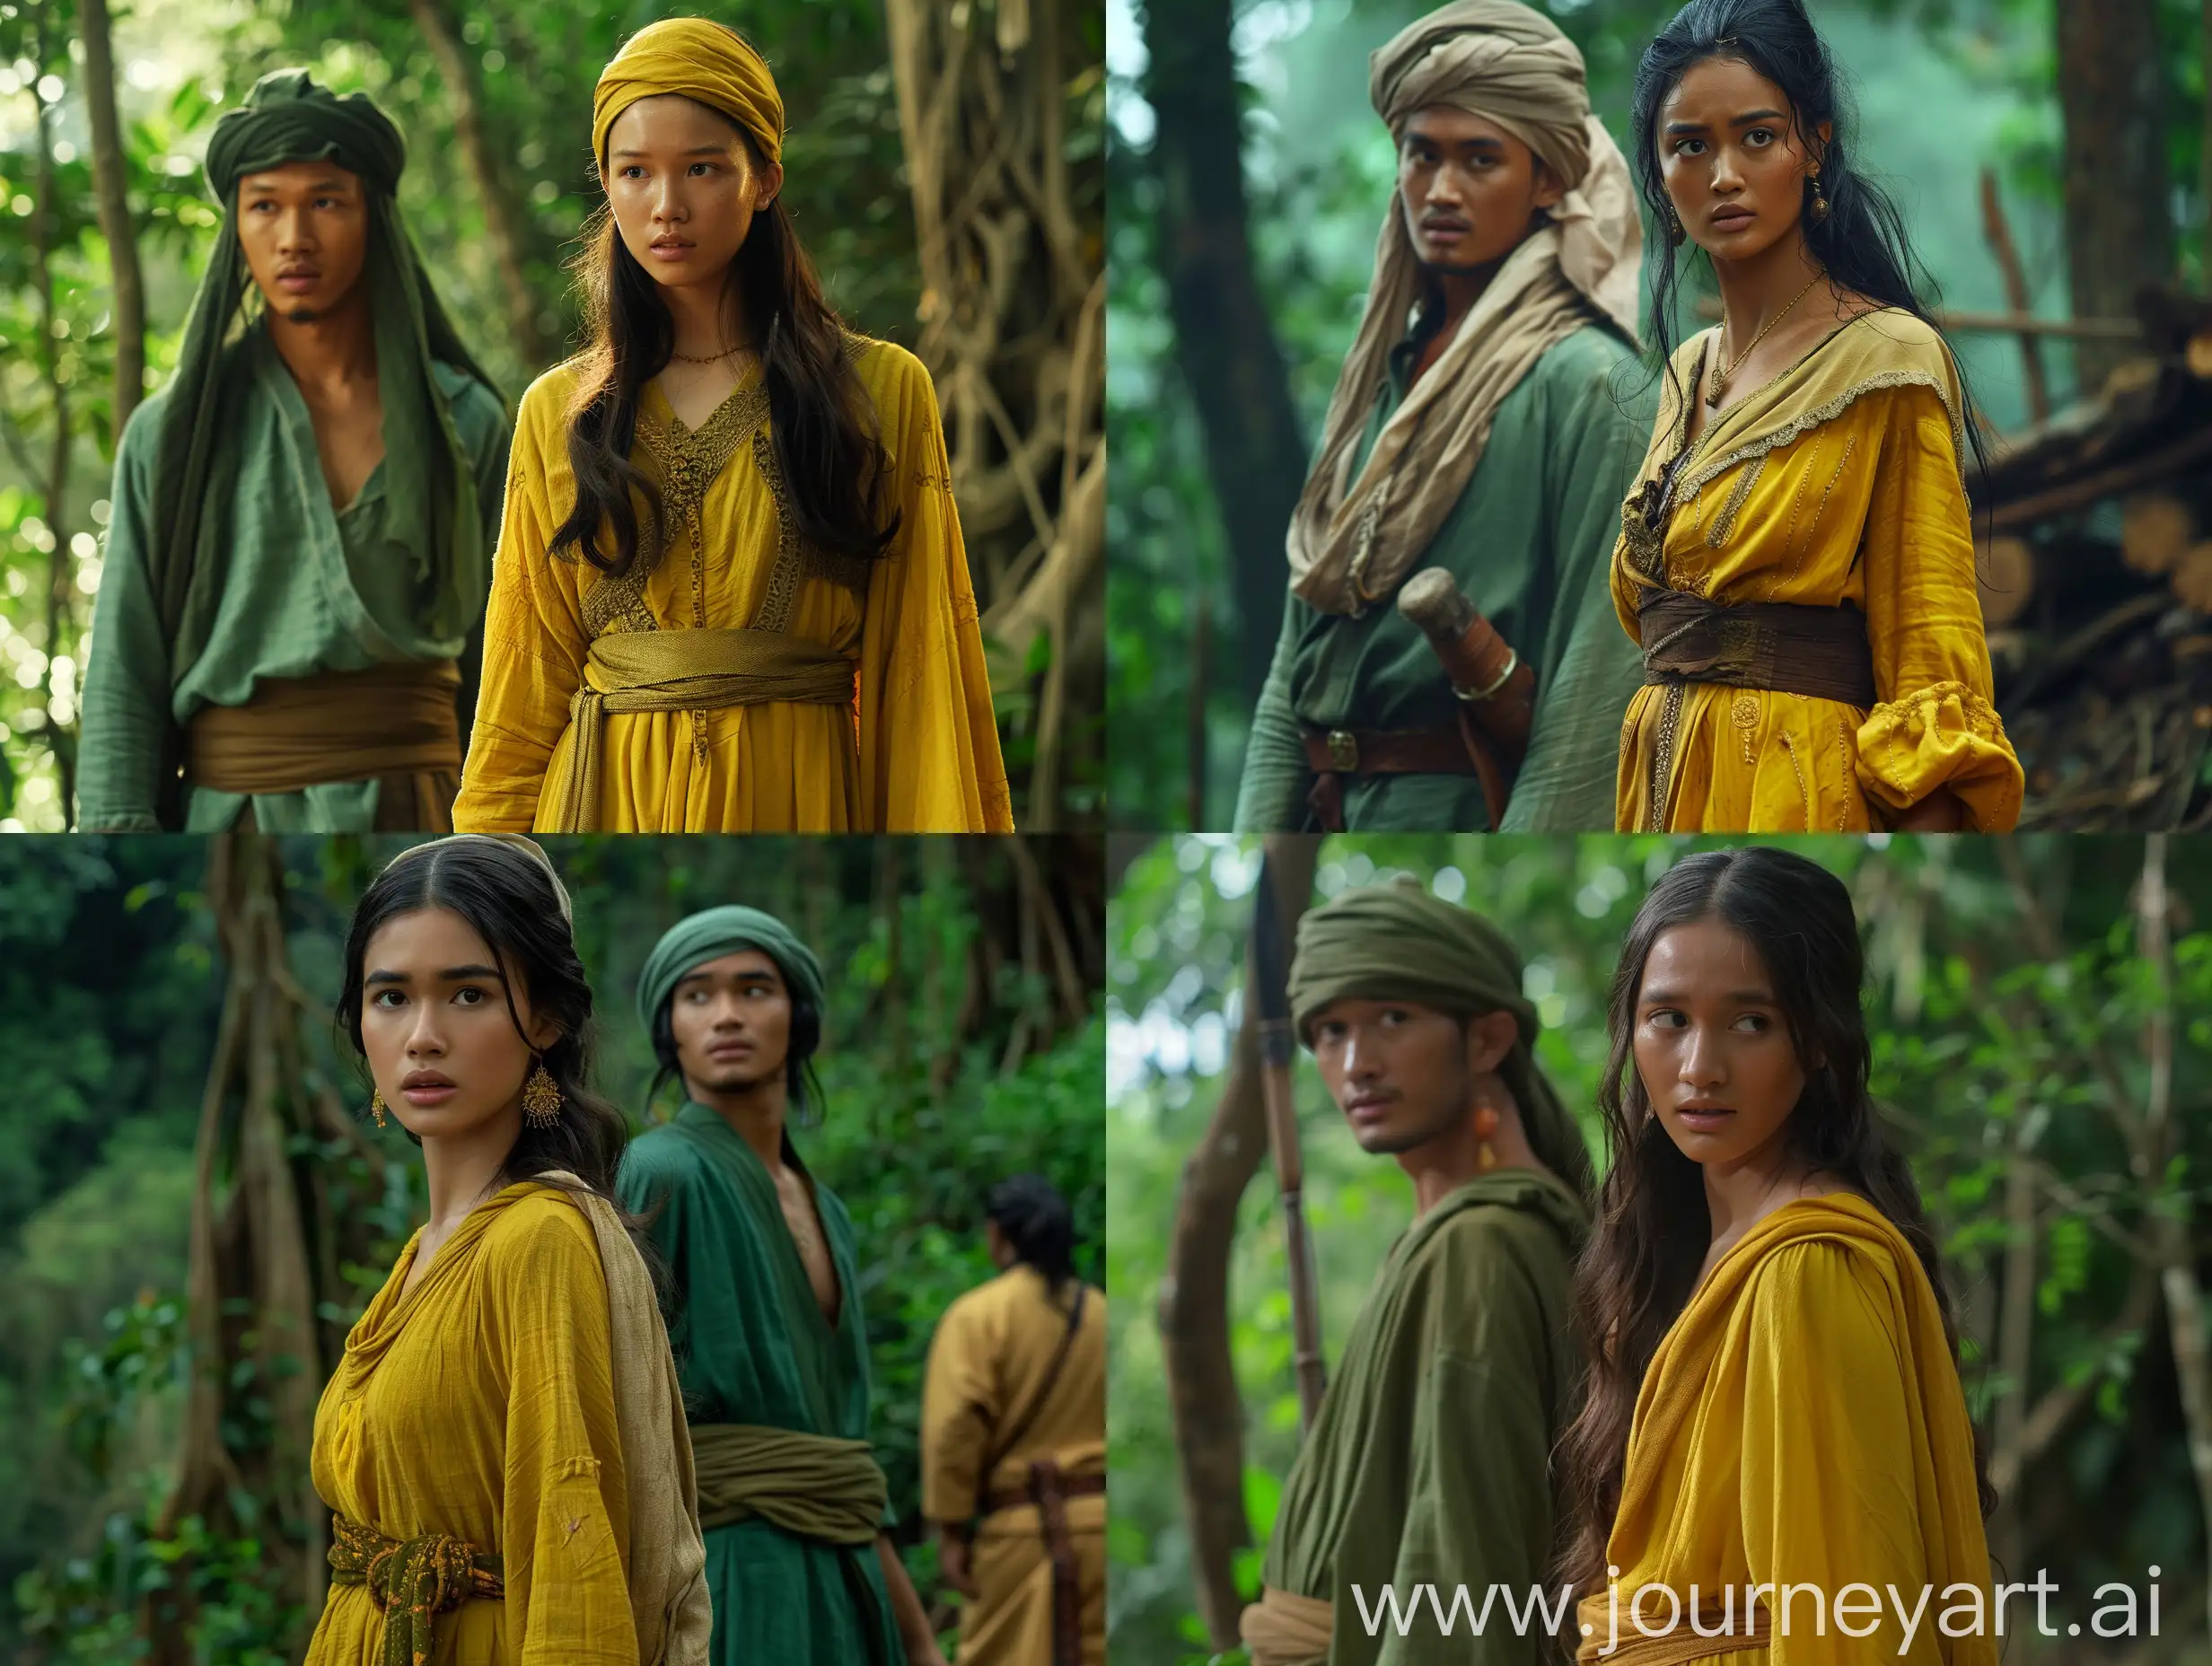 Young-Woman-in-Yellow-Dress-and-Young-Man-in-Green-in-Indonesian-Kingdom-Scene